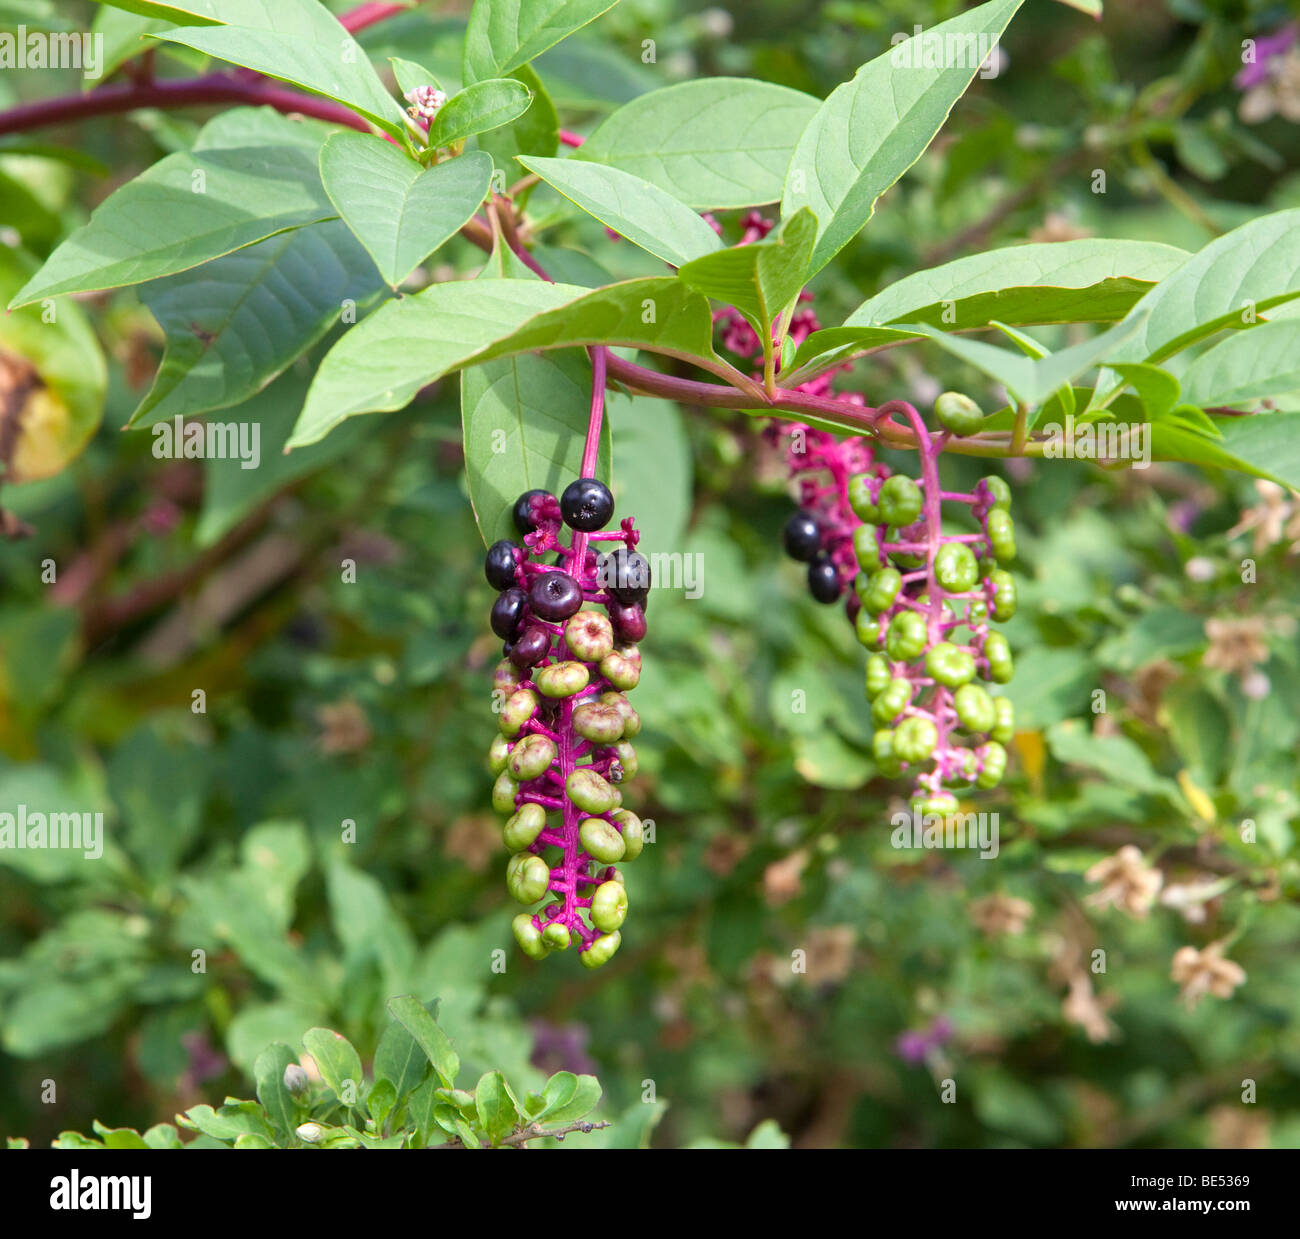 Pokeweed Family Phytolaccaceae Phytolacca decandra with purple and green berries. Stock Photo